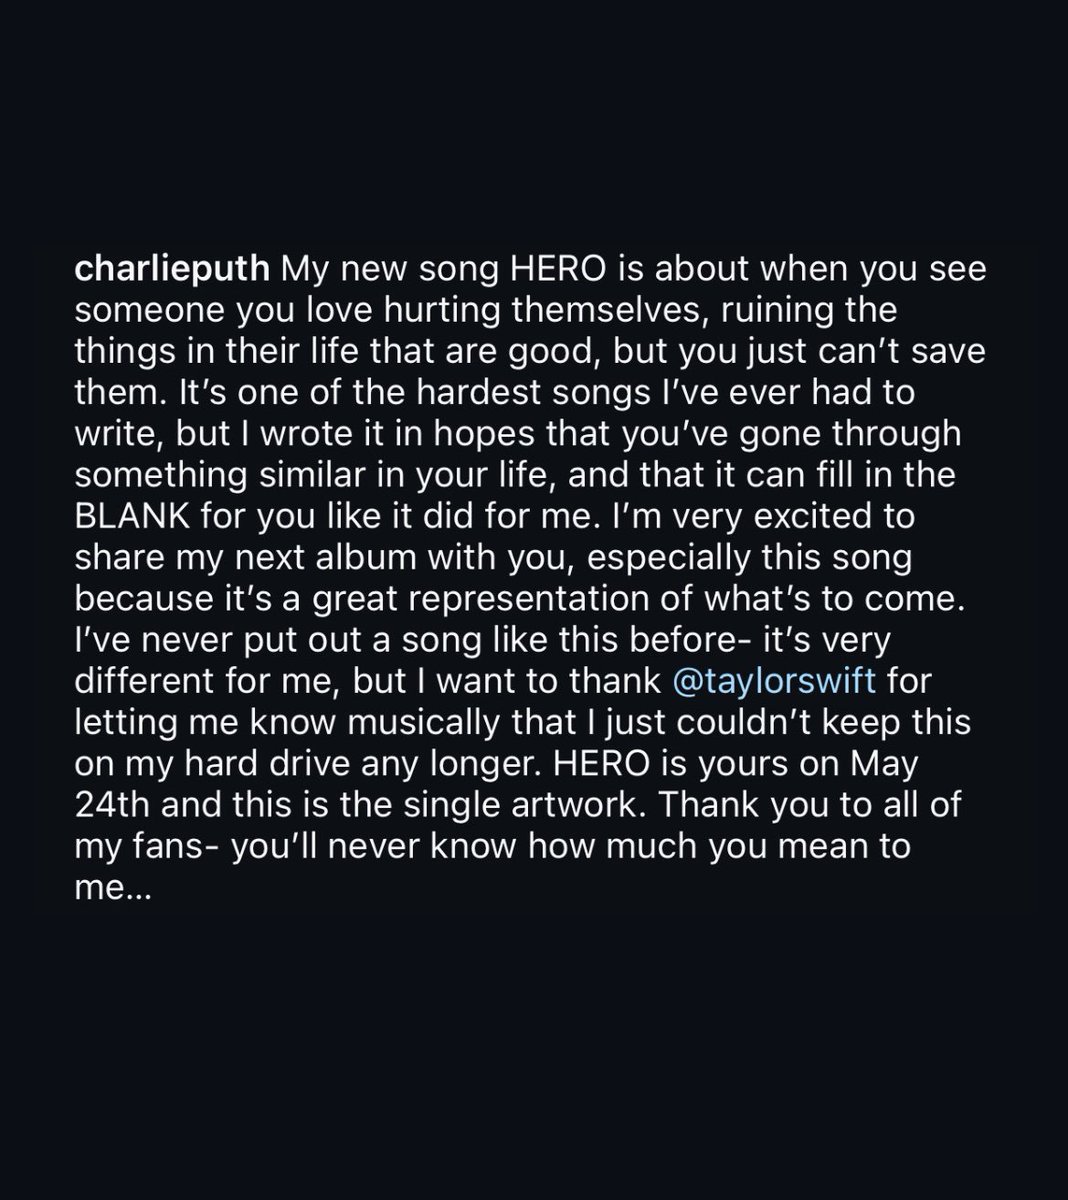 📲 | Charlie Puth thanks Taylor Swift in the announcement of his new song ‘HERO’ “I’ve never put out a song like this before- it’s very different for me, but I want to thank @taylorswift13 for letting me know musically that I just couldn’t keep this on my hard drive any longer.”